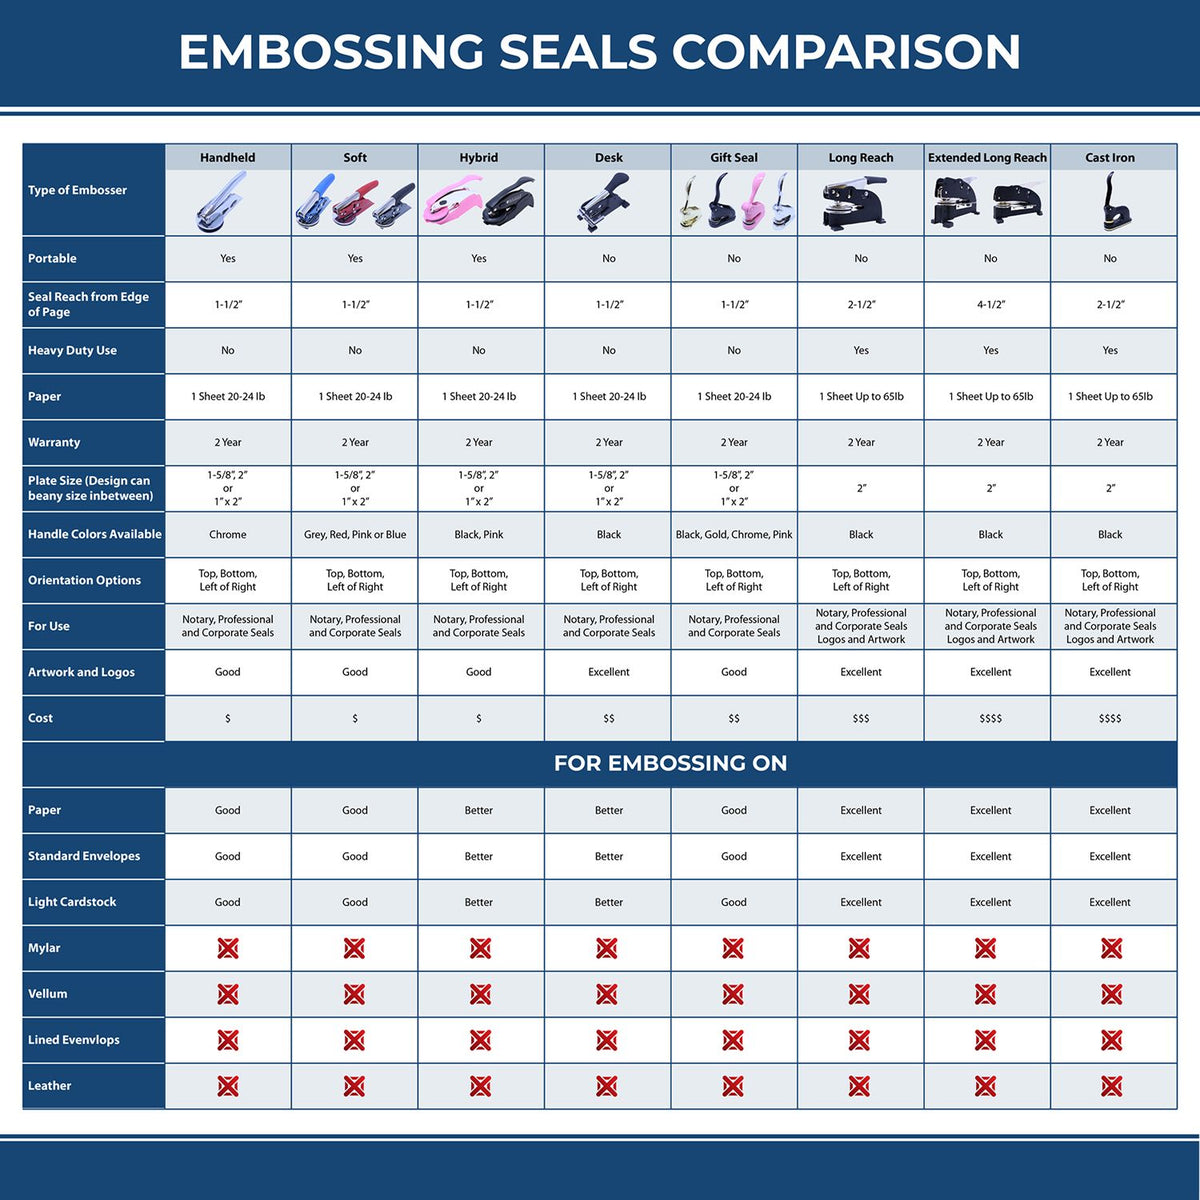 A comparison chart for the different types of mount models available for the Soft Missouri Professional Engineer Seal.